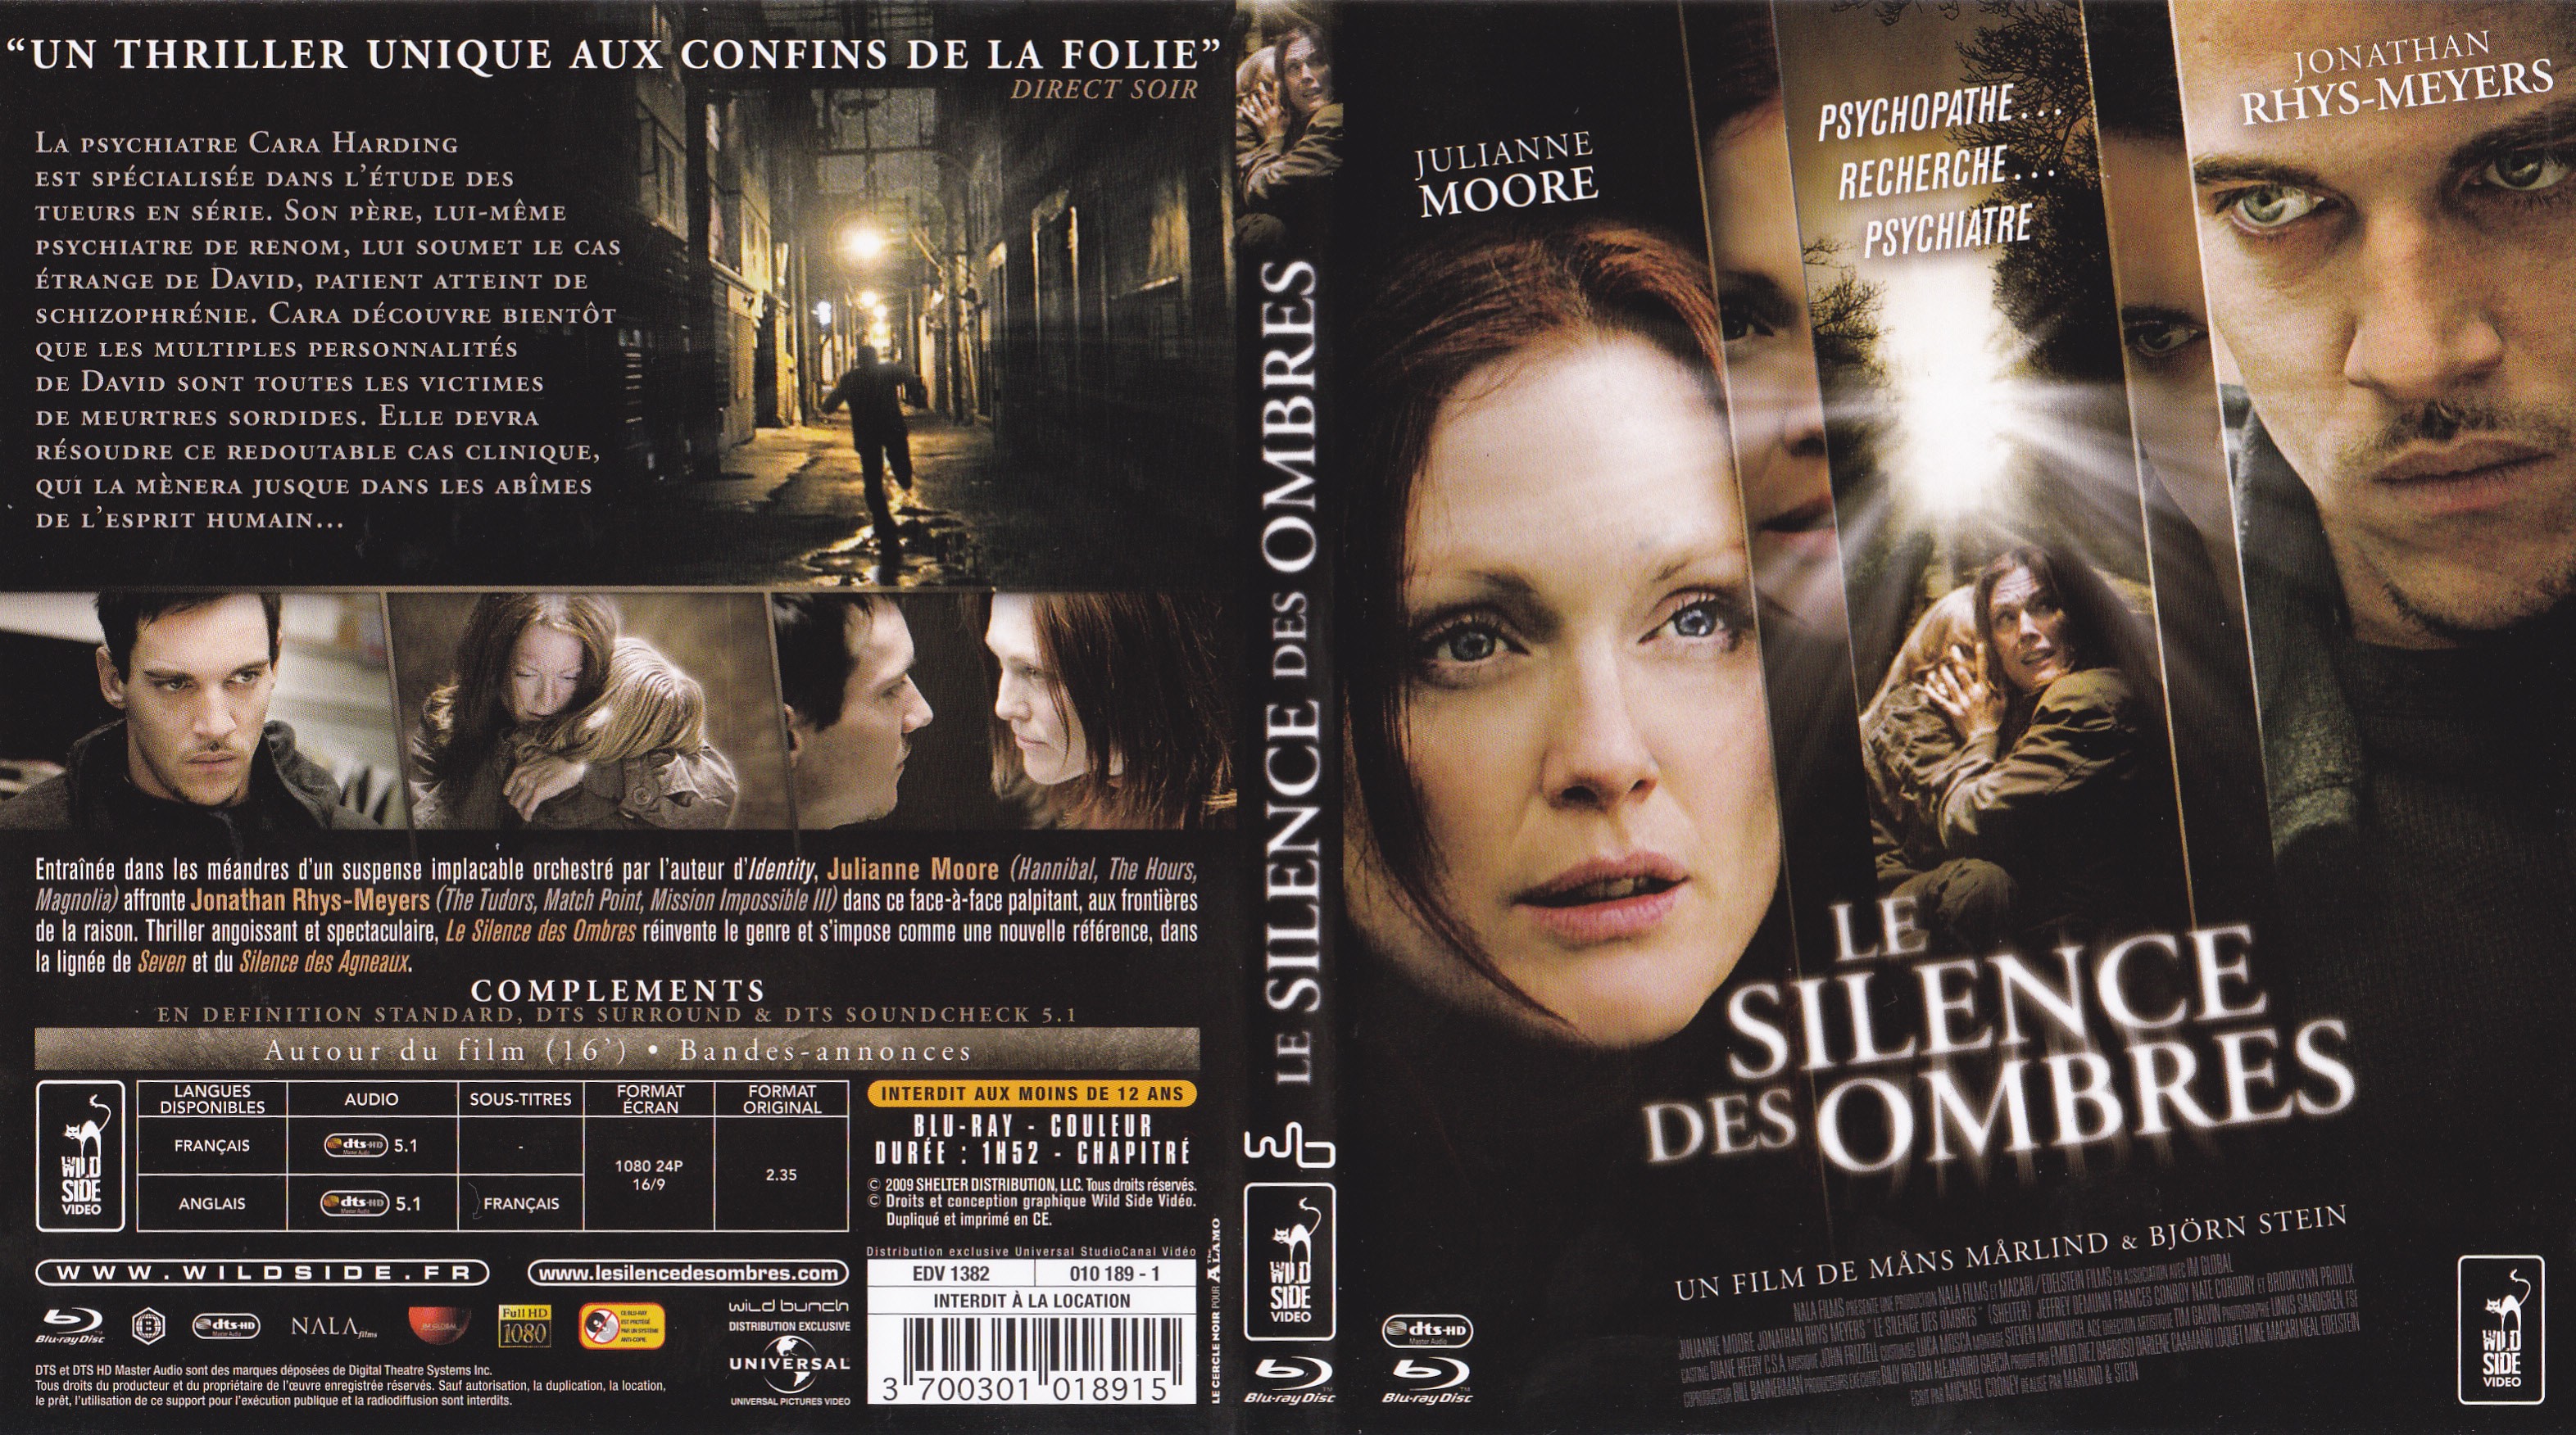 Jaquette DVD Le silence des Ombres (BLU-RAY)